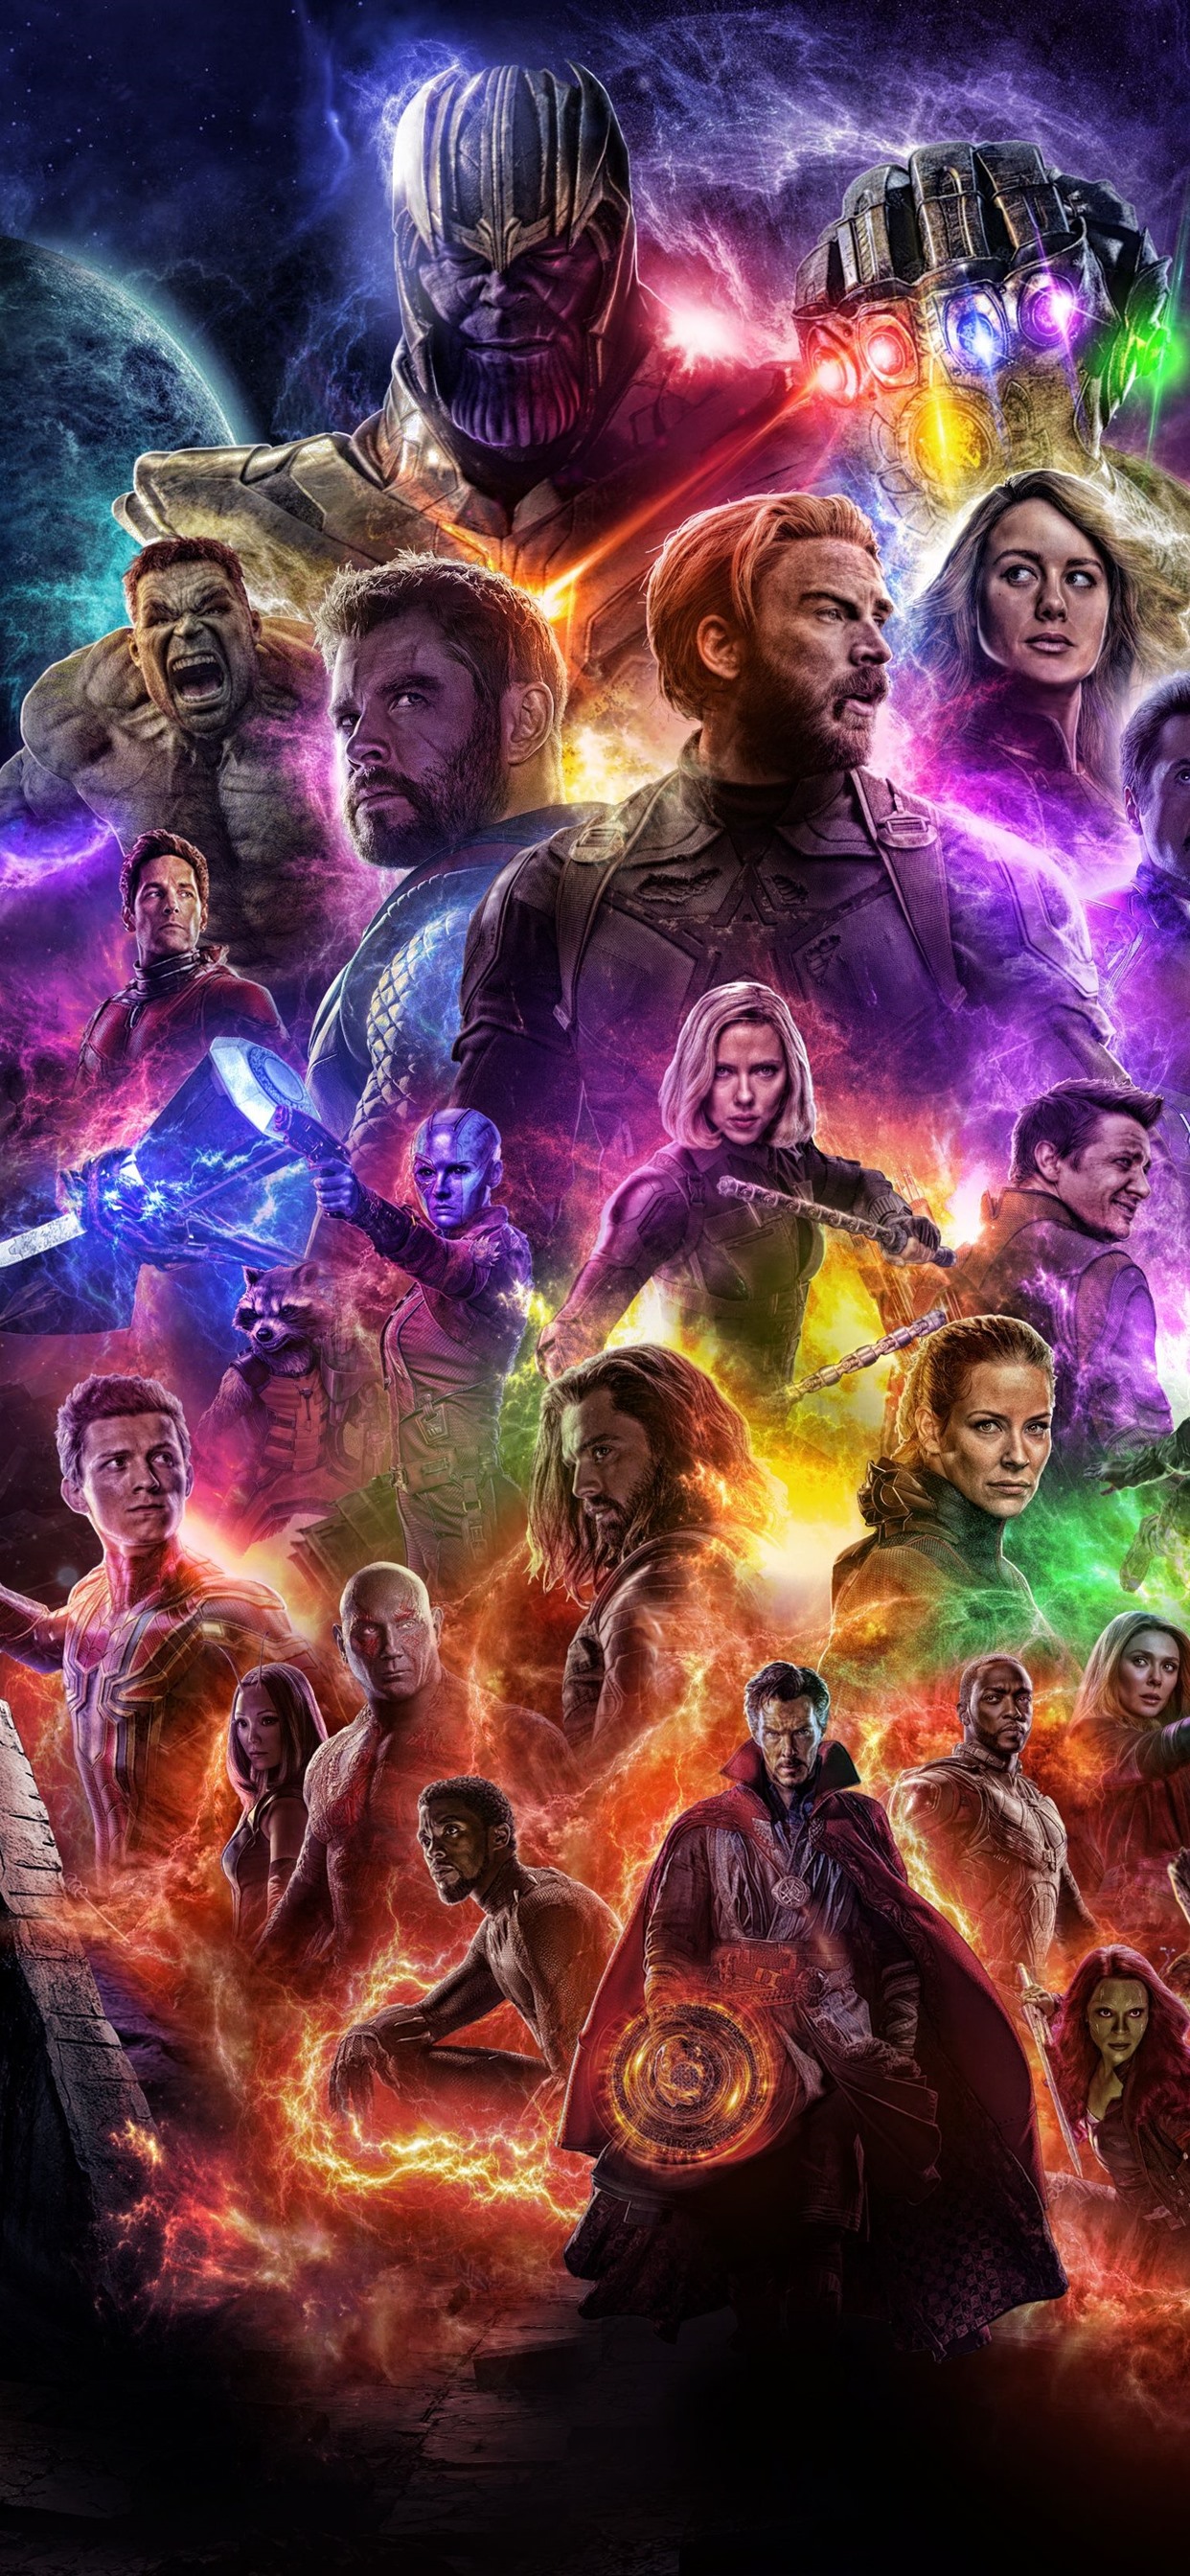 Avengers: Endgame 2019 1242x2688 iPhone XS Max wallpaper, background